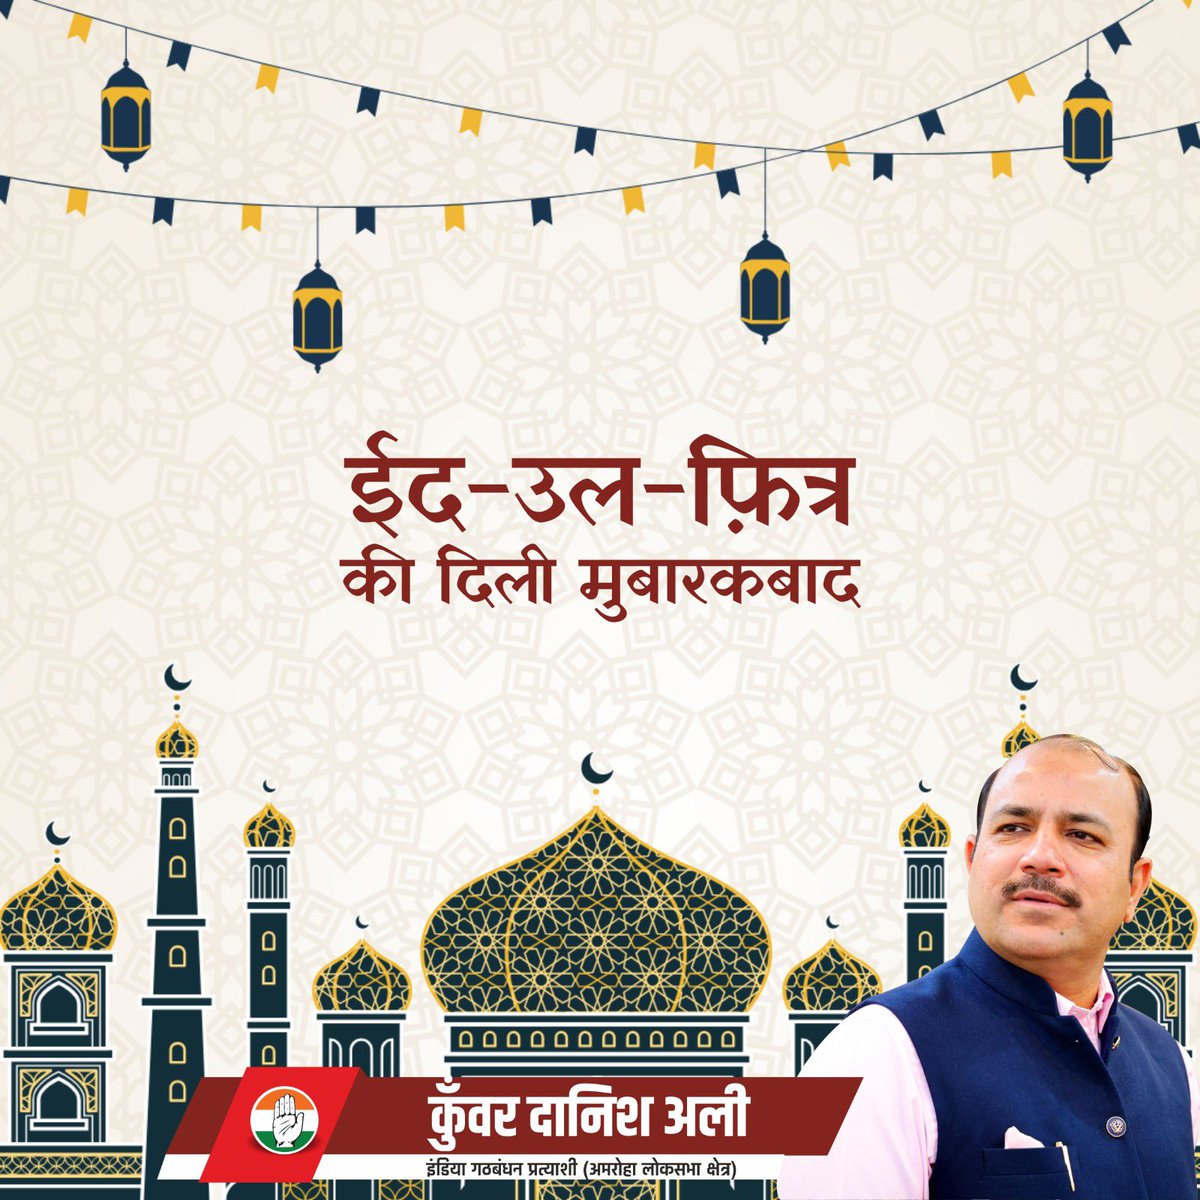 On the occasion of #EidUlFitr, warmest greetings to the people of my #Amroha constituency and all my fellow countrymen. May this Eid bring peace and prosperity to the country, immense happiness in your lives and renewed hopes for upholding human values n brotherhood in the world.